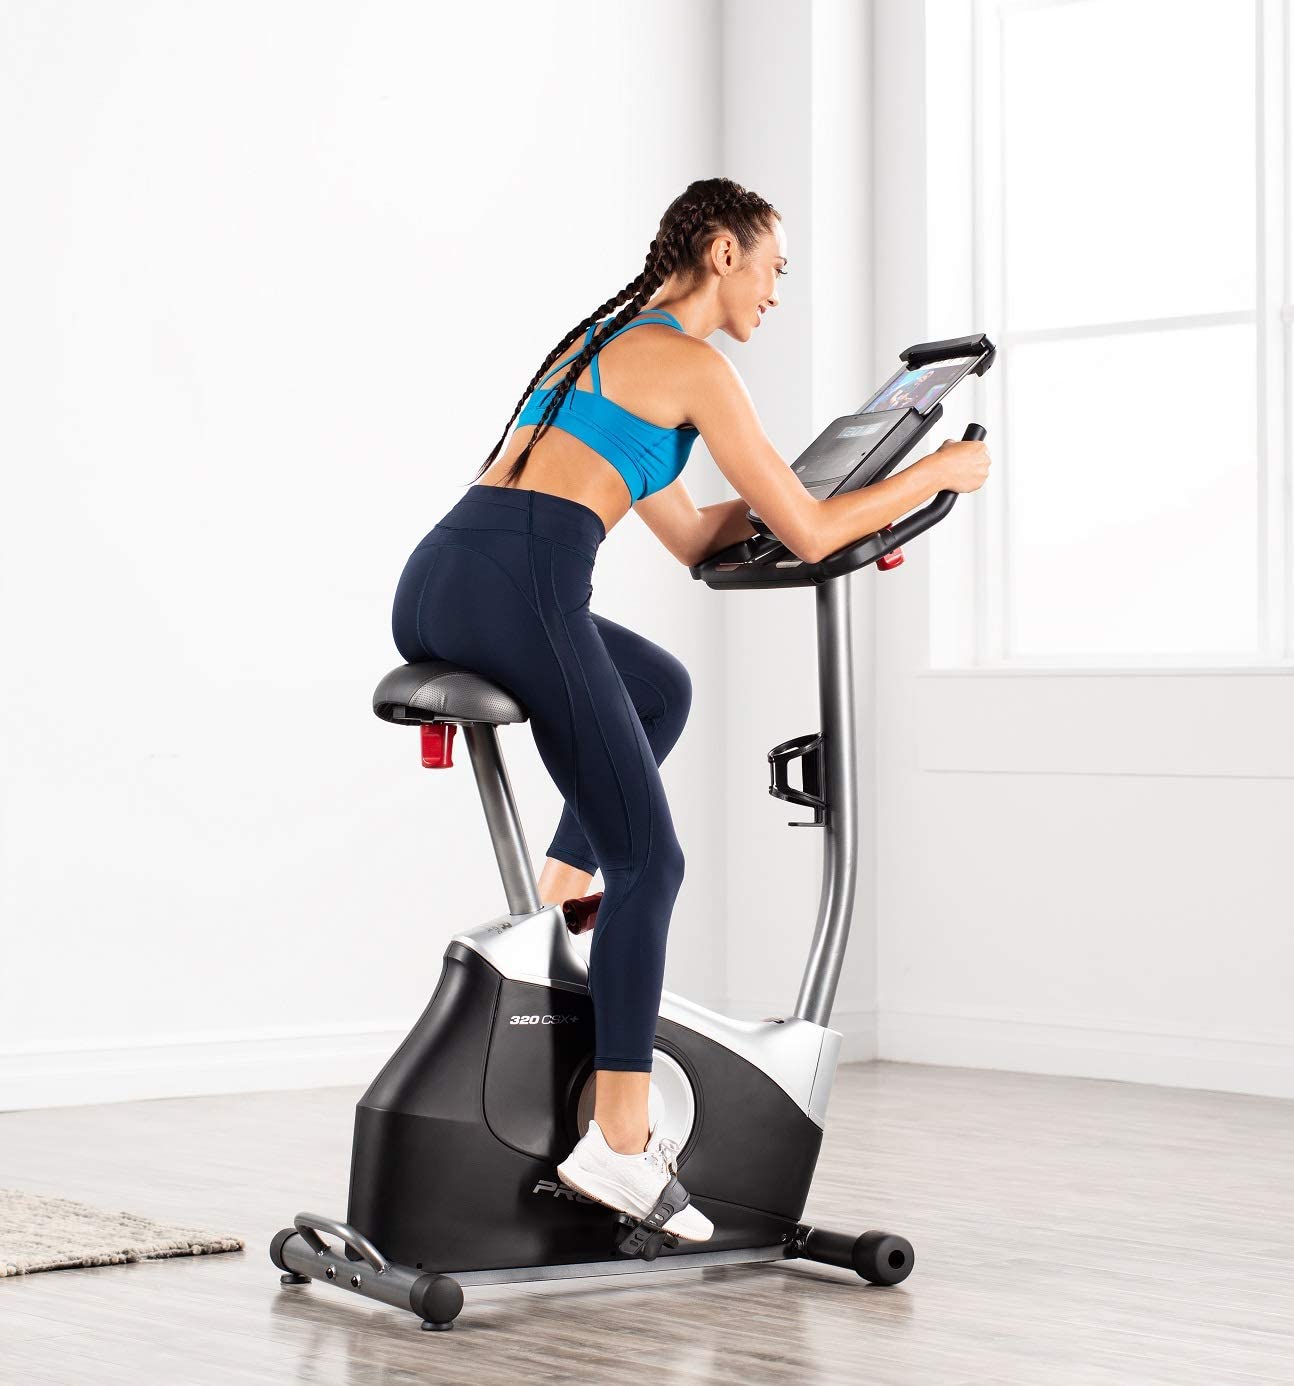 Proform 320 CSX+ Exercise Bike - with a female model cycling